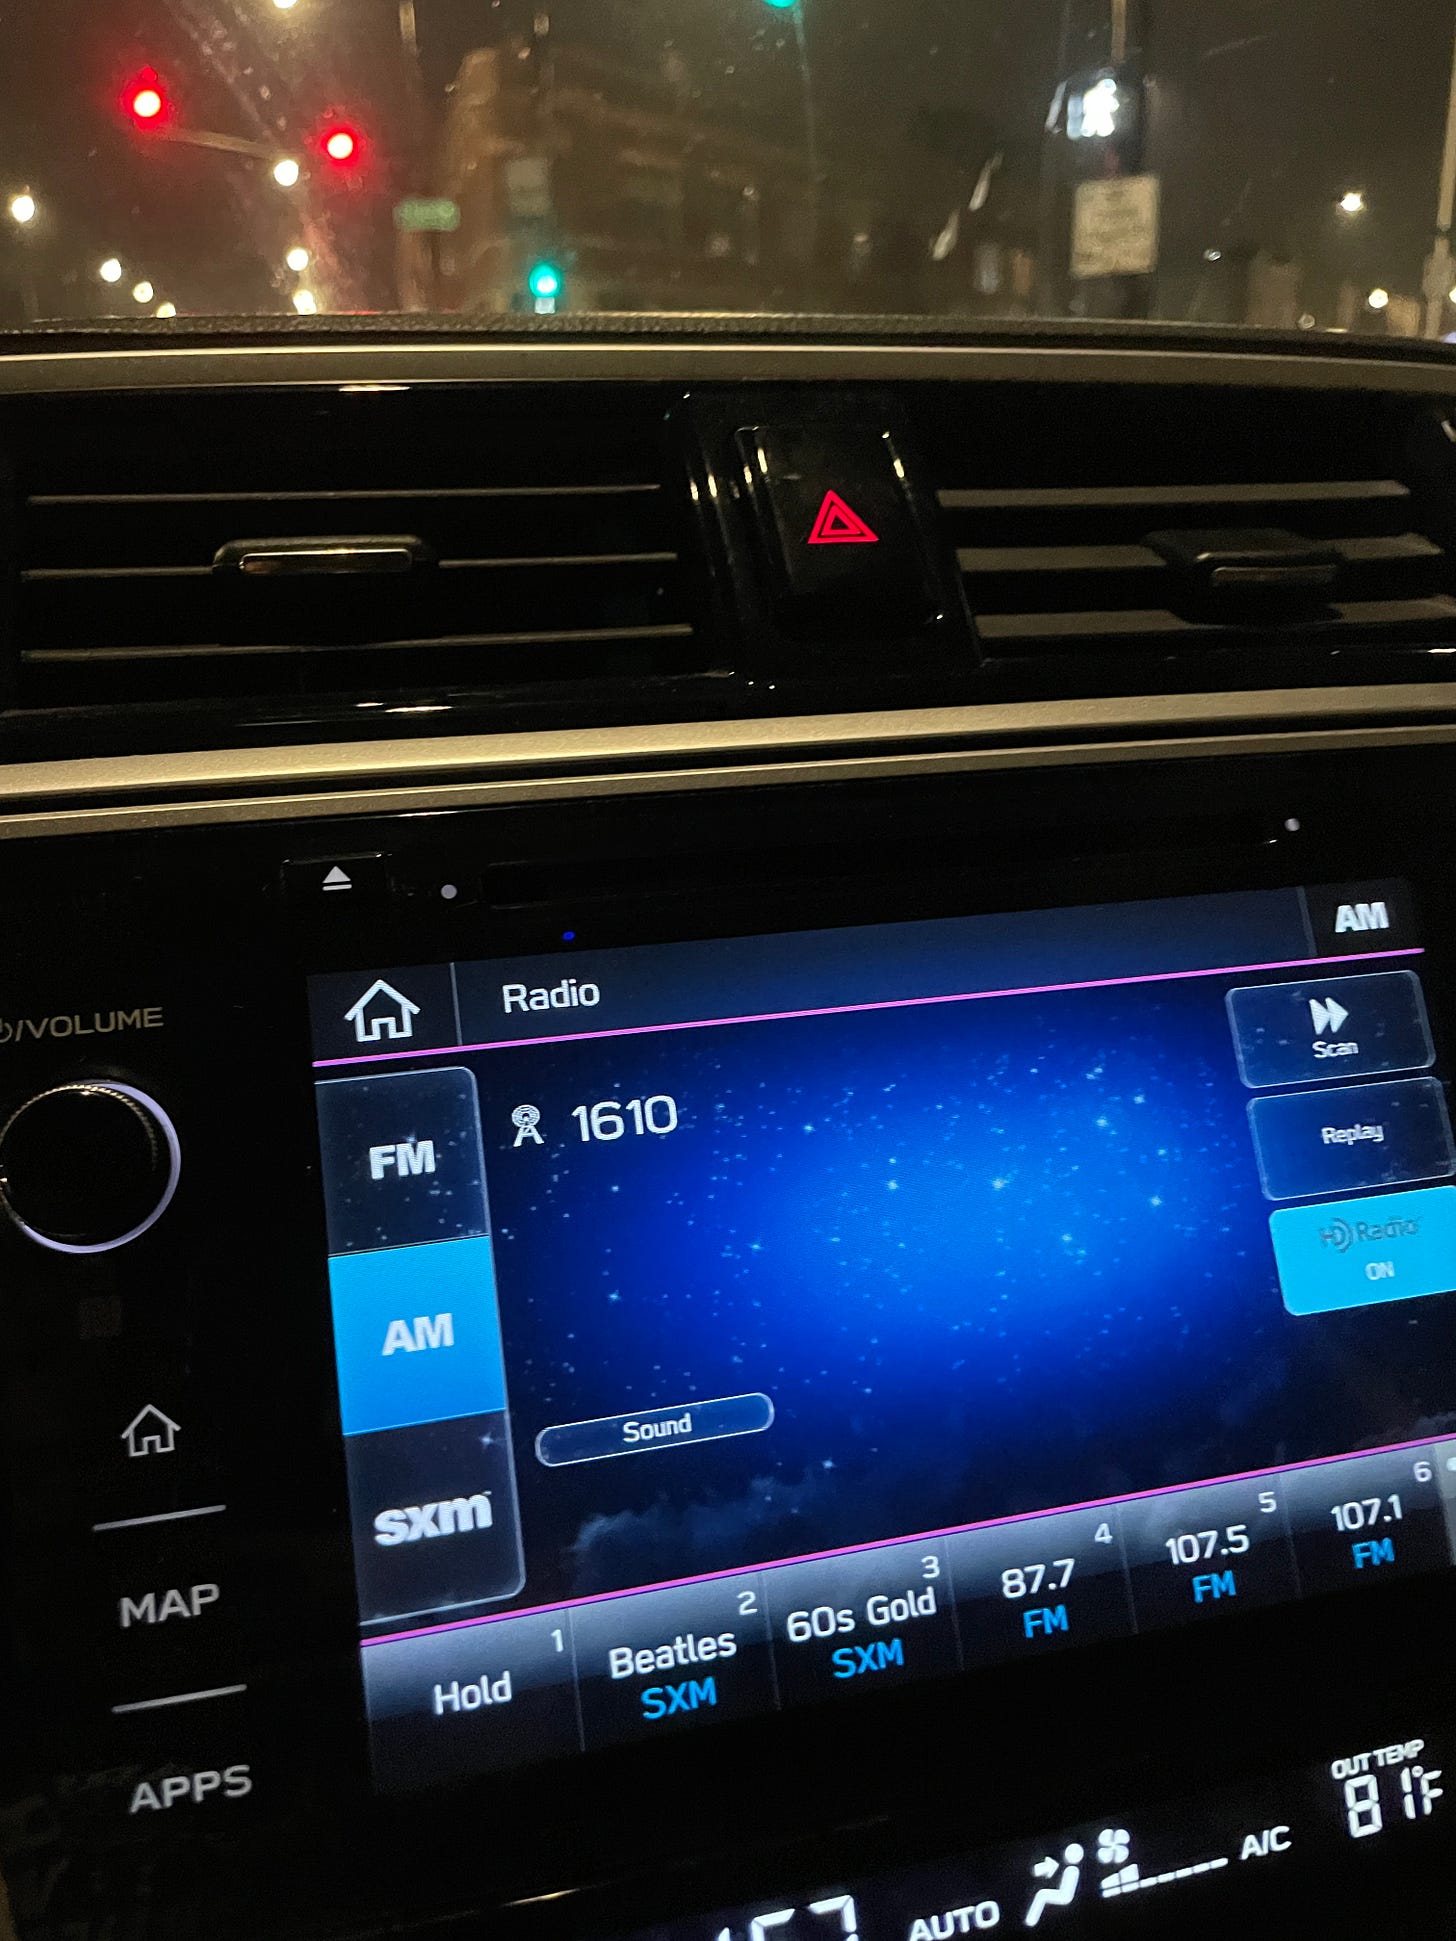 My car radio’s screen tuned to AM 1610, a Chicago street at night seen through the windshield.